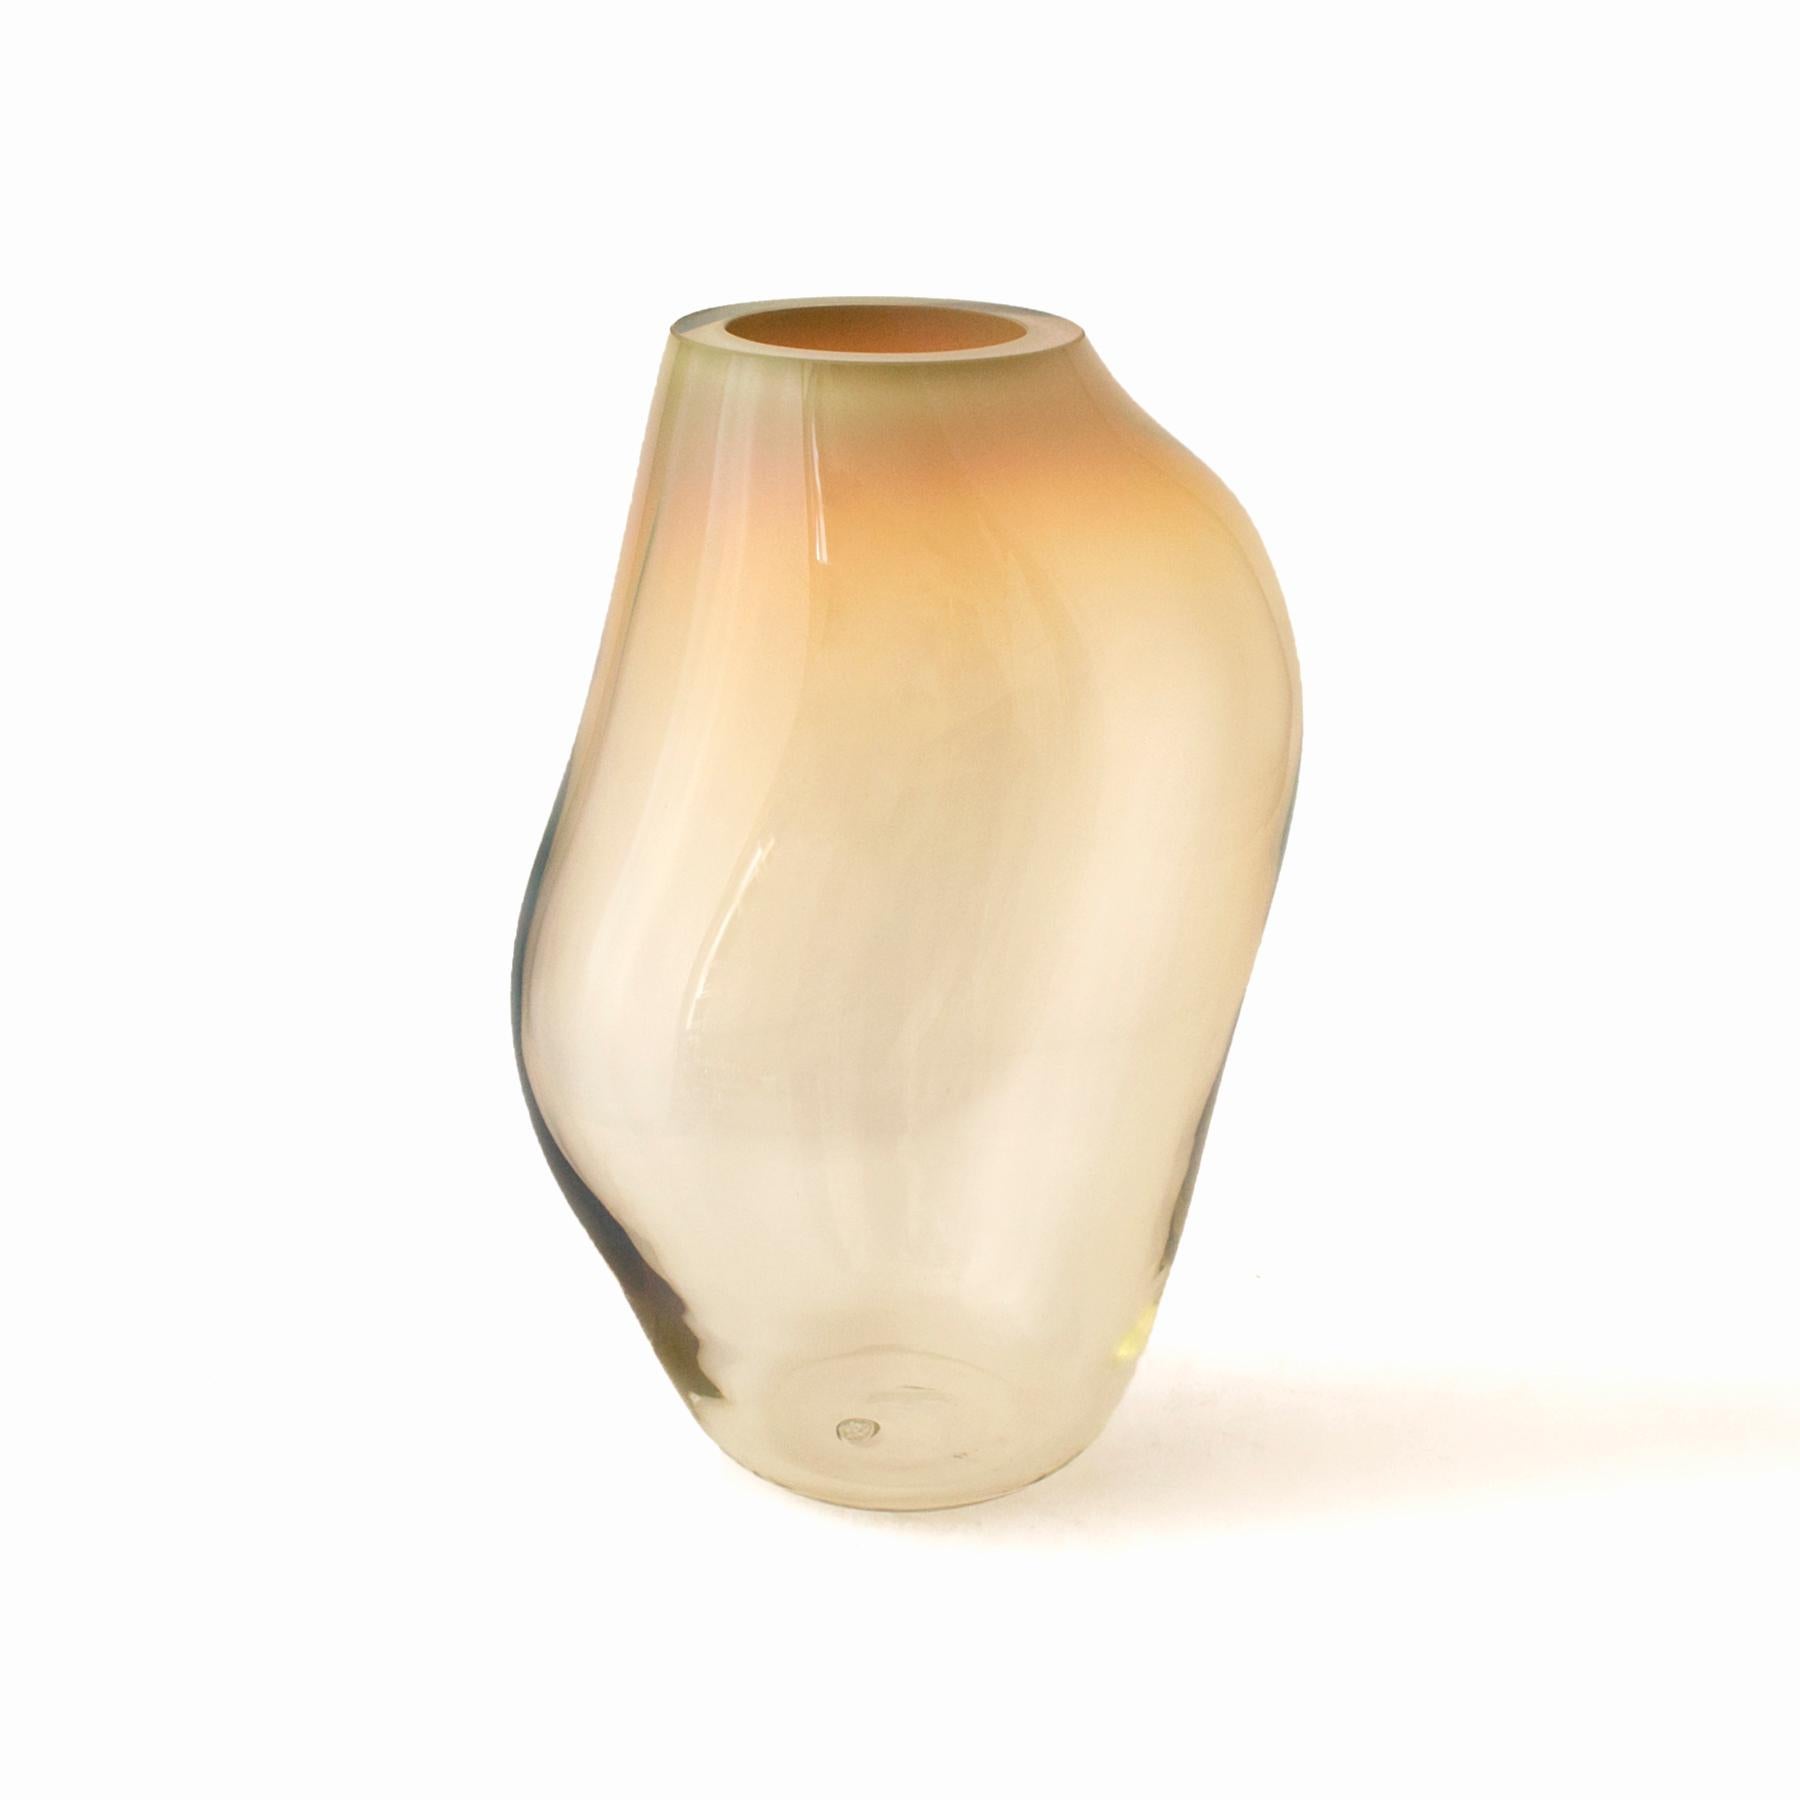 Set of 2 supernova iv amber iridescent m vases by Eloa.
No UL listed 
Material: glass.
Dimensions: D15 x W 17 x H 36 cm.
Also available in different colours and dimensions.

Supernova is a collection of vases and bowls that, though they don‘t